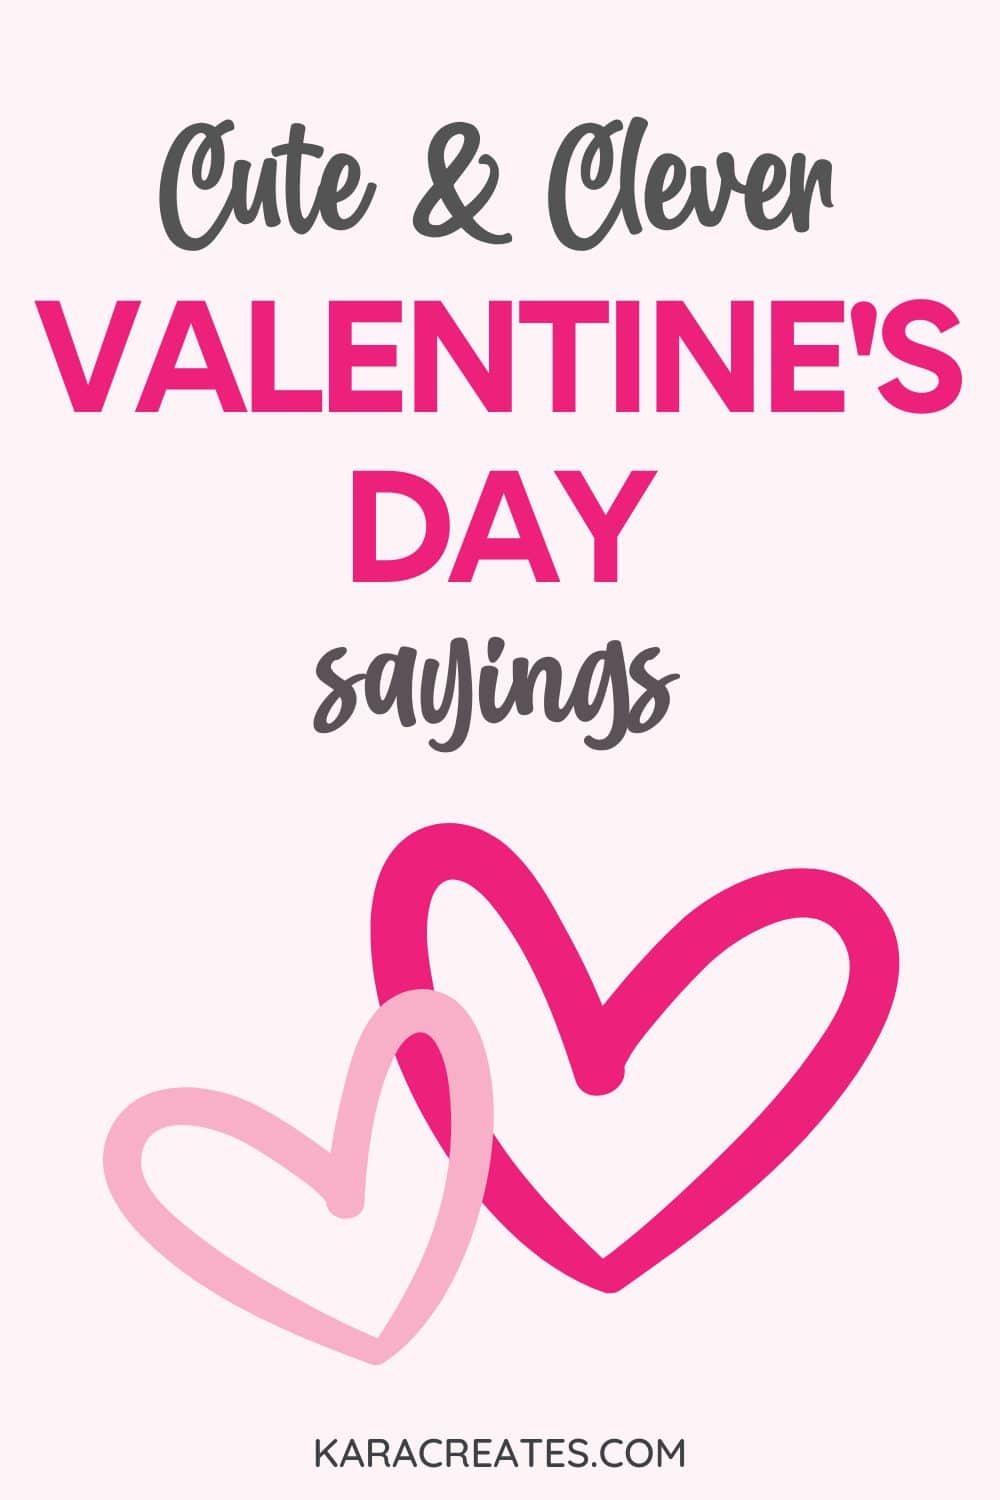 The Ultimate List of Valentine's Day Sayings - over 100 Valentine's Day sayings for gifts, candy, and more!